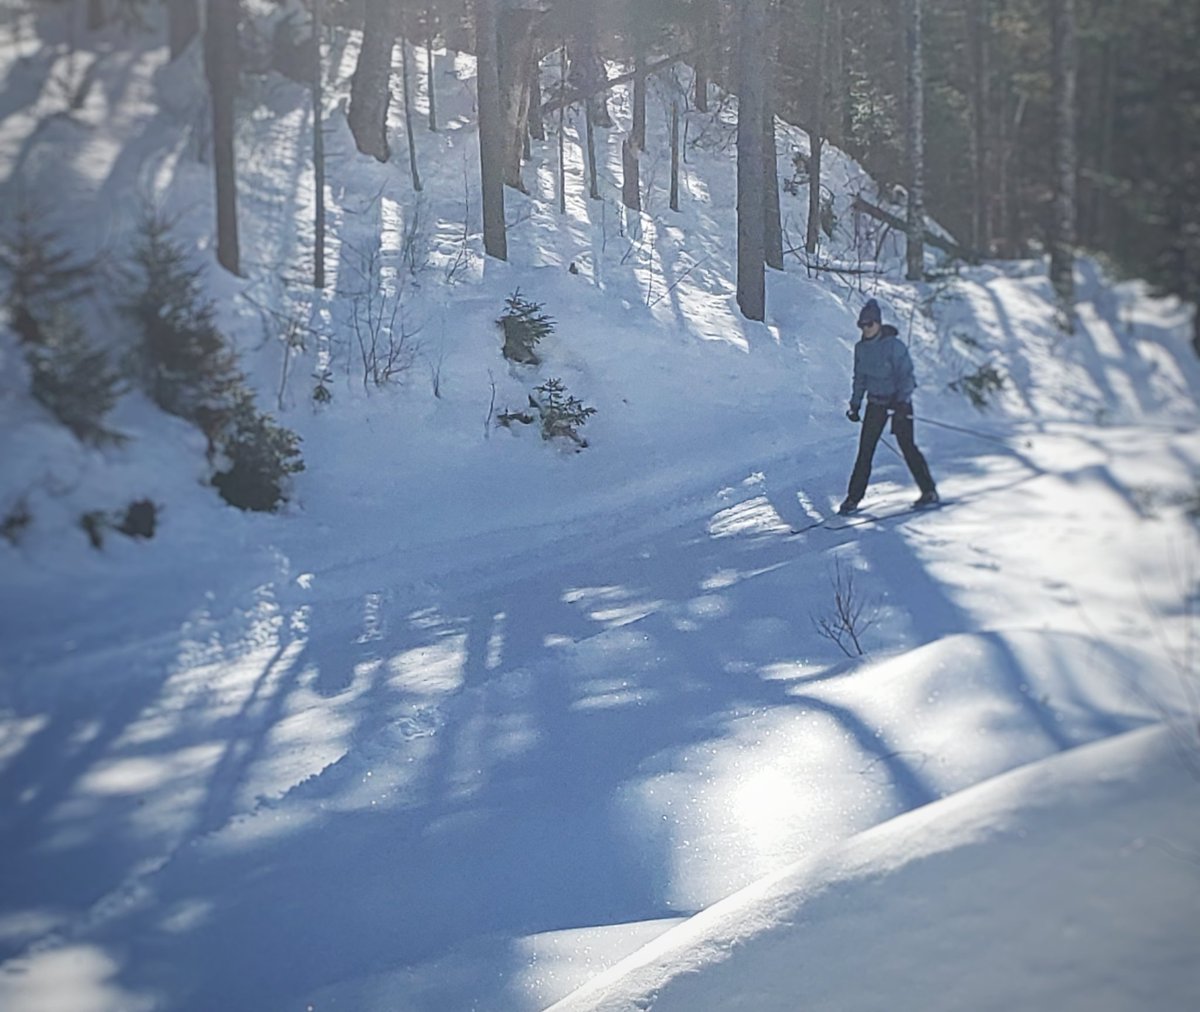 Green Woodlands with Ems for a #nordicskiing #skateskiing adventure! Love the Trout Pond Loop!